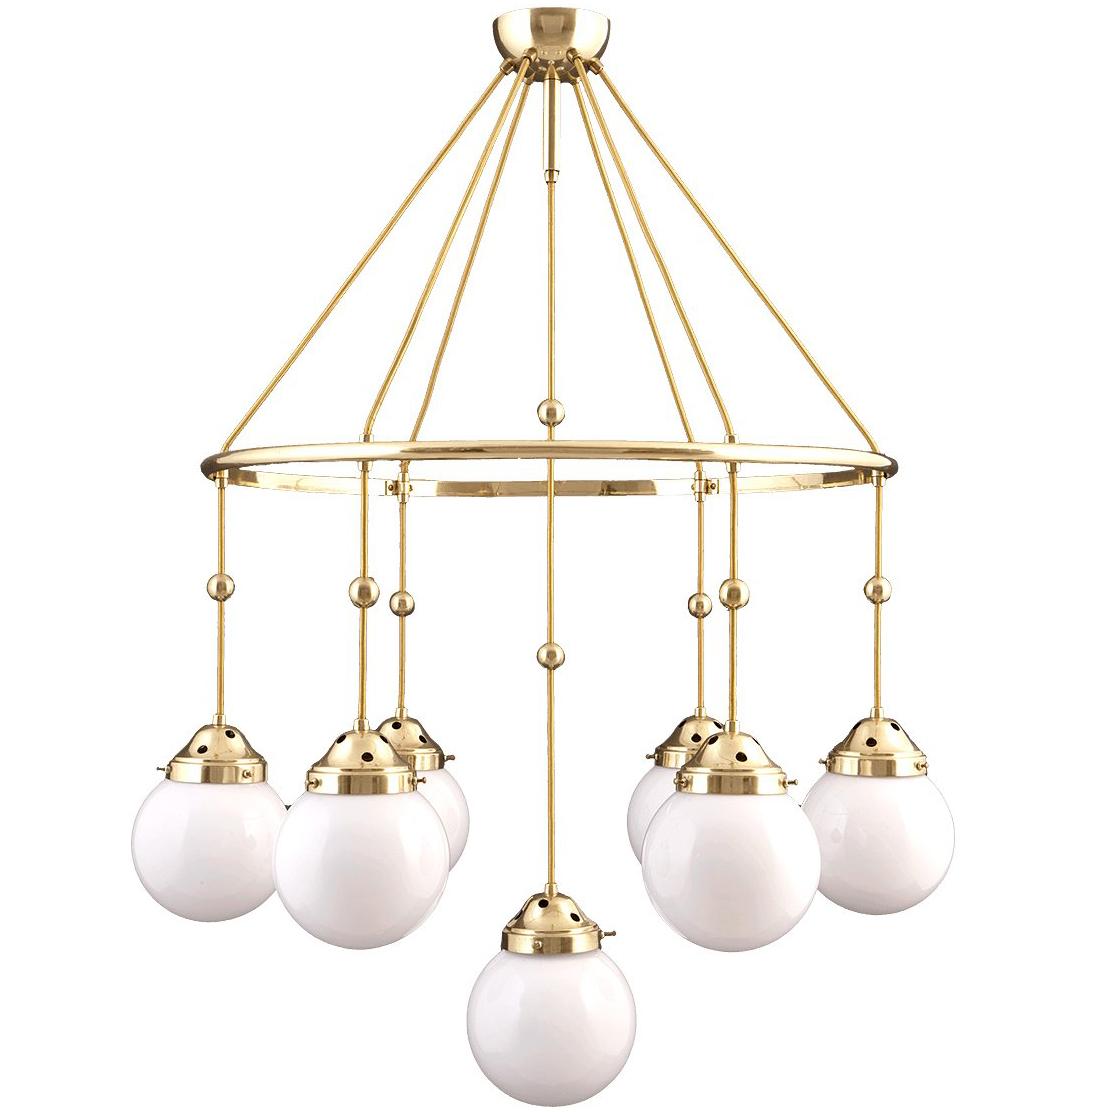 These kind of chandeliers were often used by Adolf Loos in mansions he designed.

All components according to the UL regulations, with an additional charge we will UL-list and label our fixtures.
 